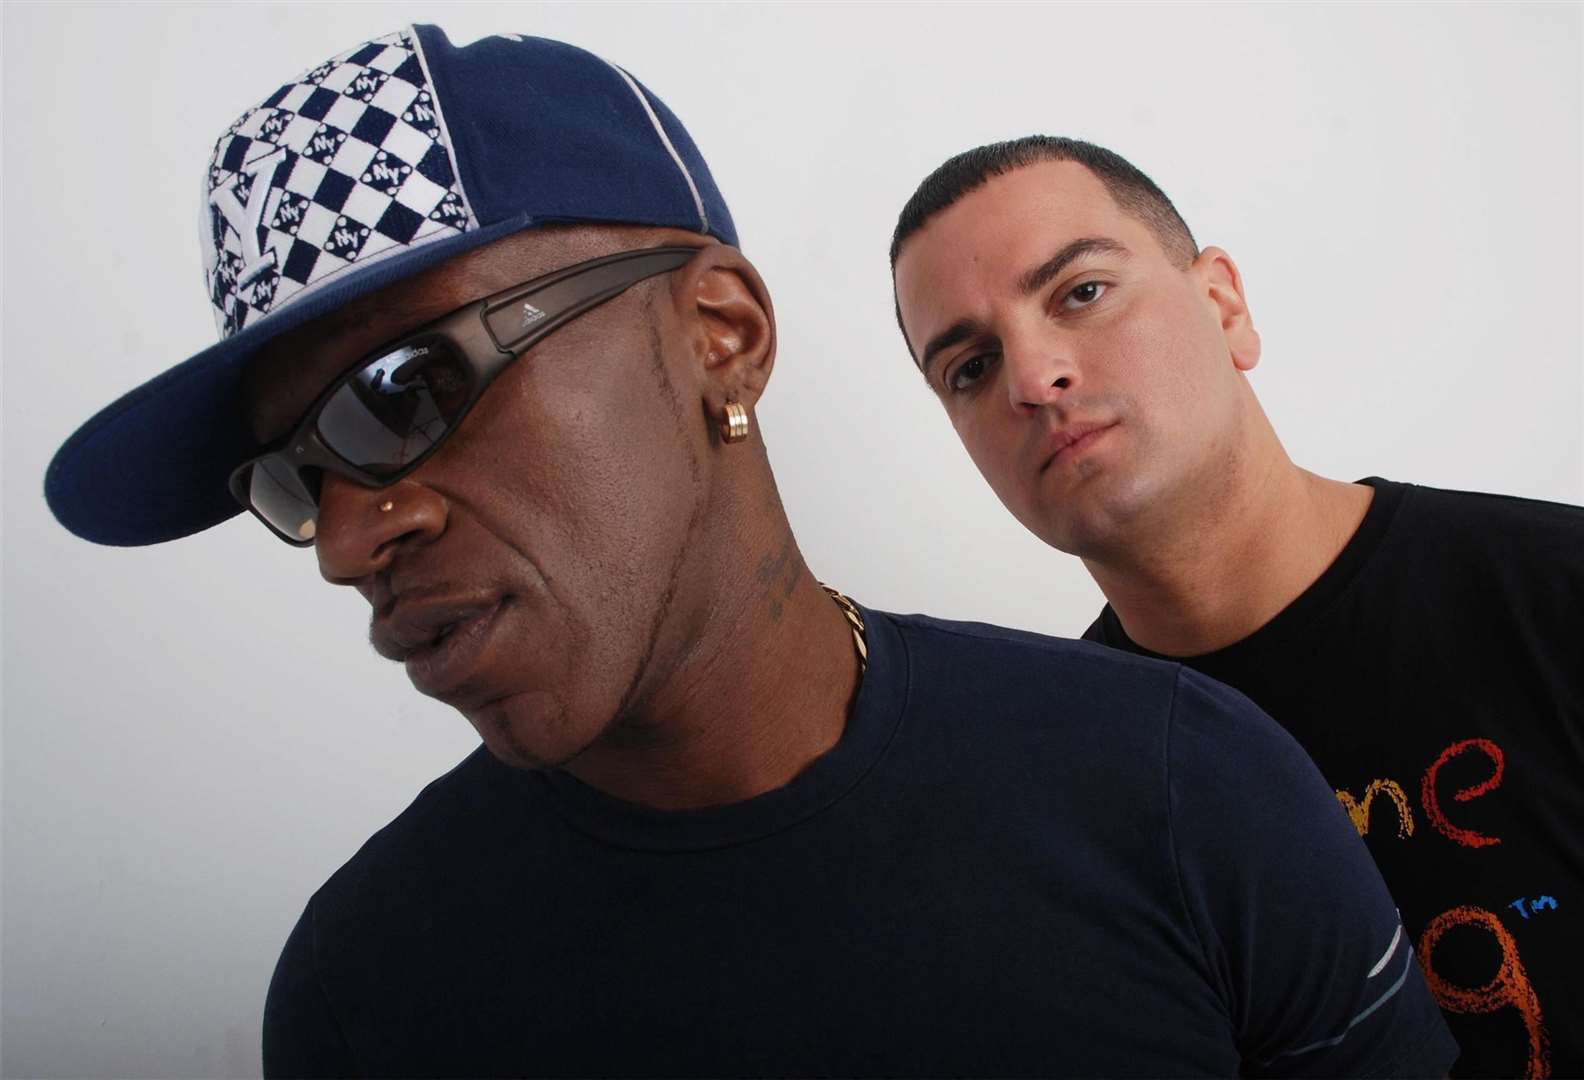 DJ Luck and MC Neat are coming to Gravesend town centre